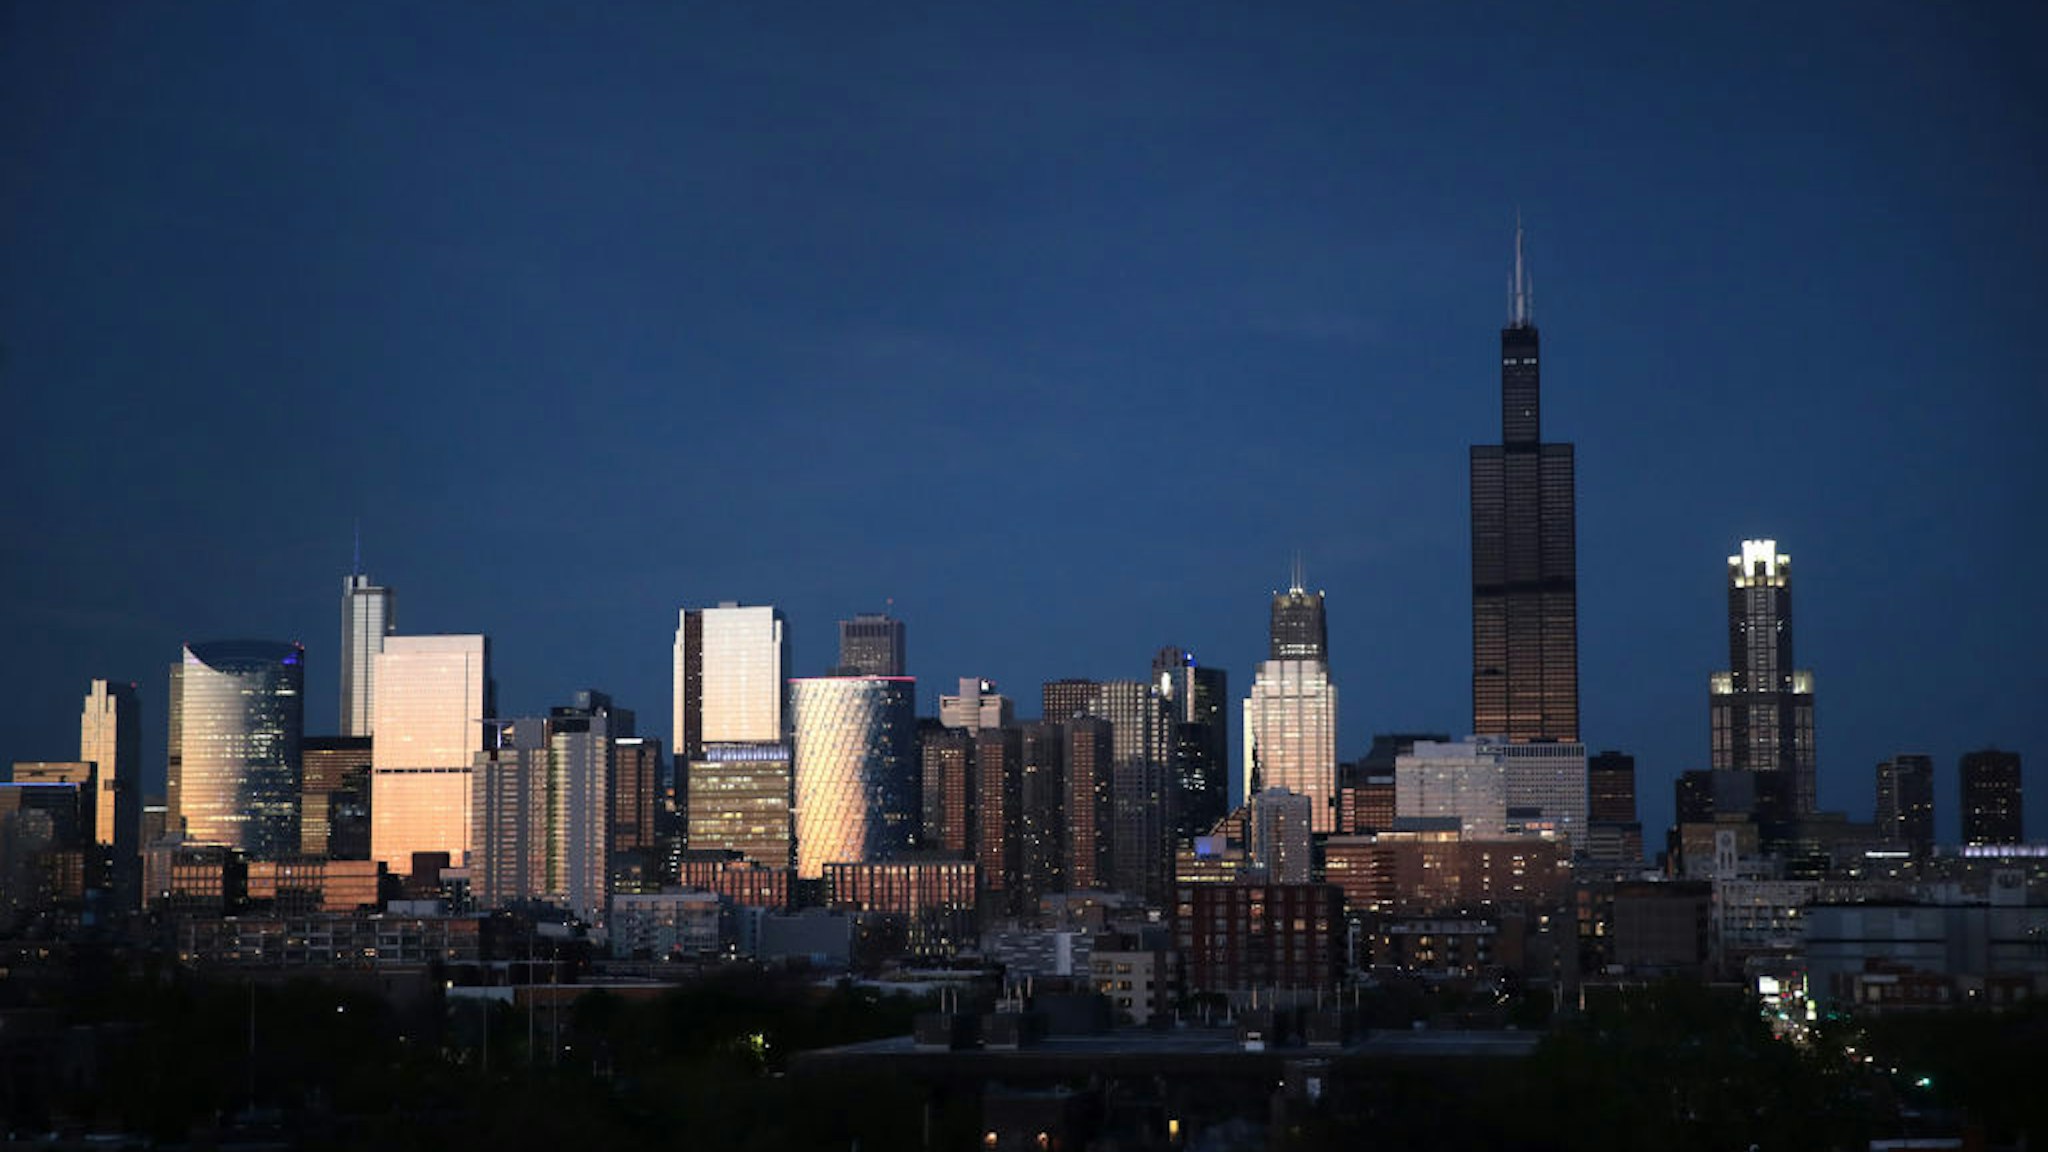 The Willis Tower rises above the downtown skyline as a blackened mass after flooding caused by recent heavy rains knocked out power to the building Monday on May 20, 2020 in Chicago, Illinois.